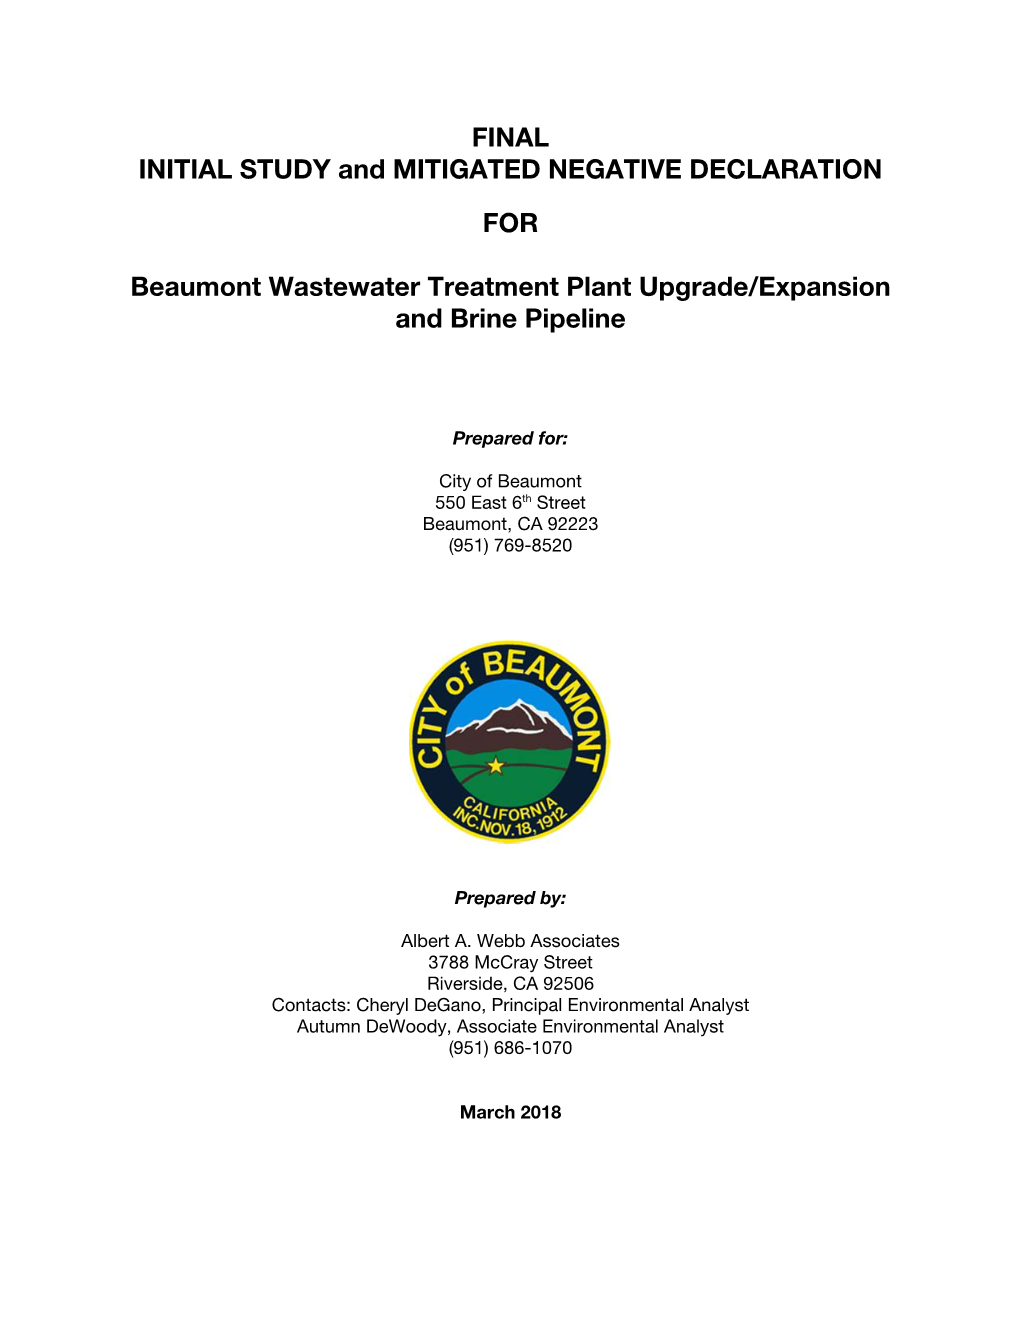 FINAL INITIAL STUDY and MITIGATED NEGATIVE DECLARATION